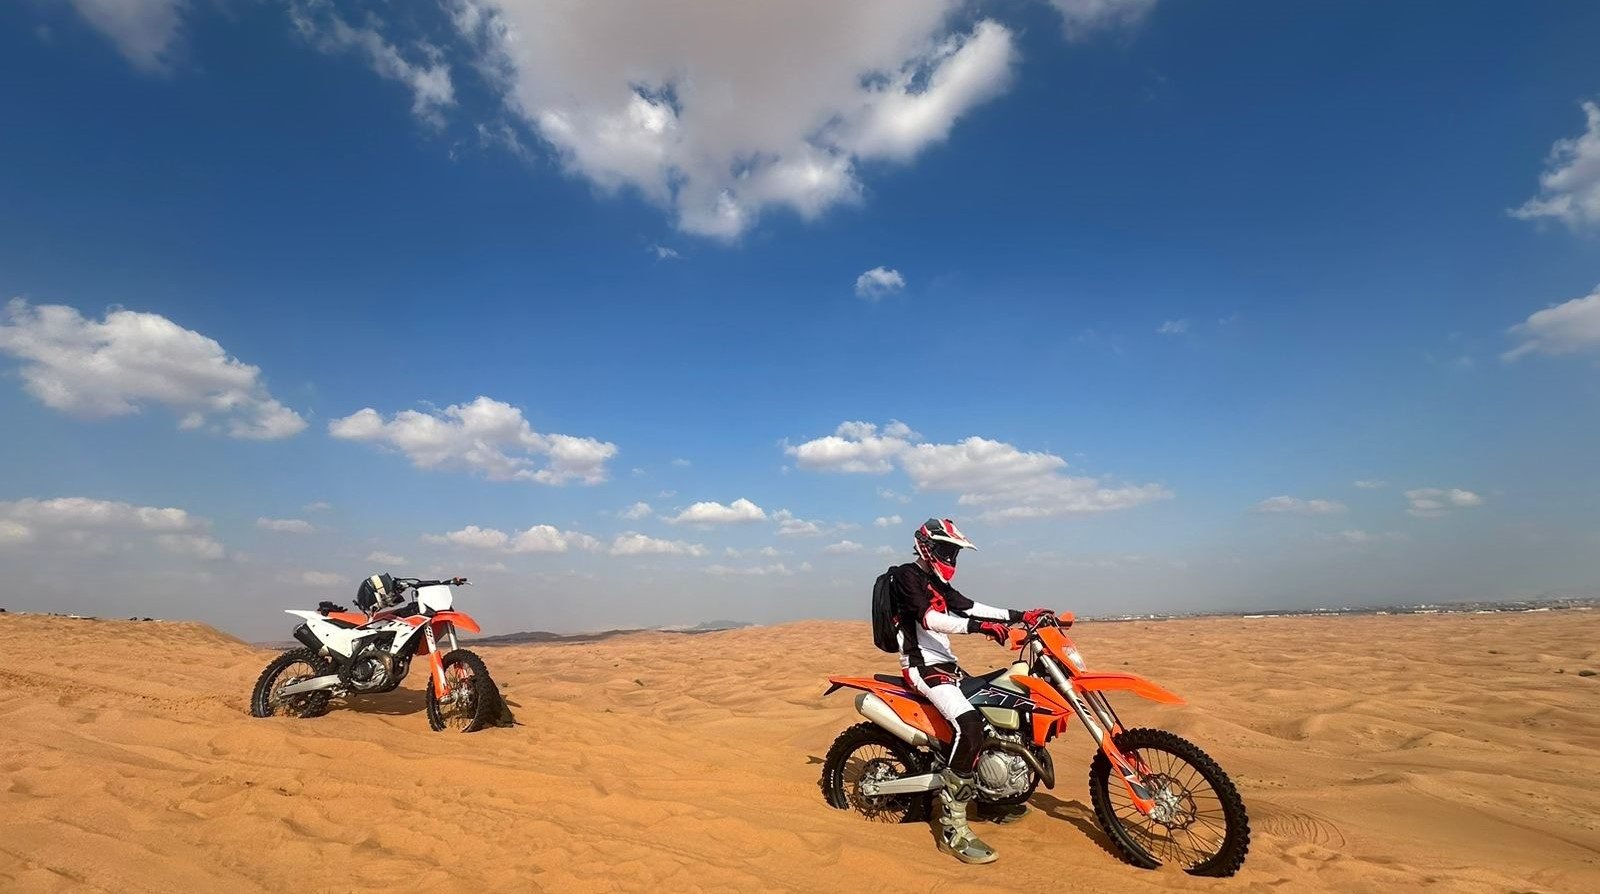 The Best Time of Year for Dirt Biking in Dubai